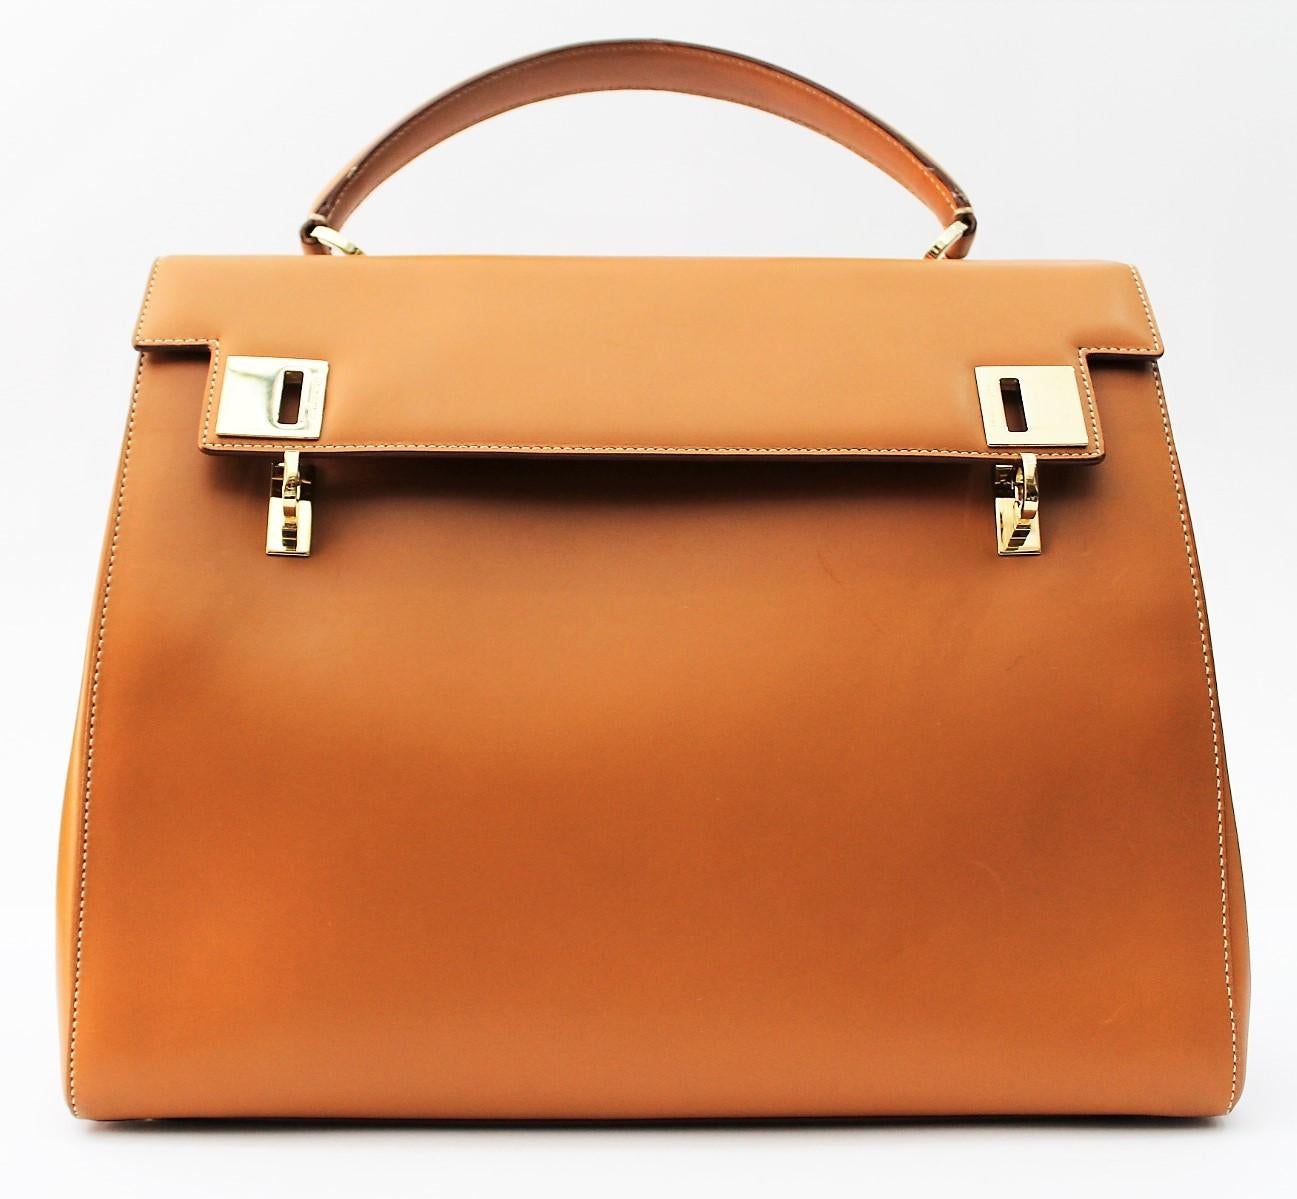 Salvatore Ferragano handbag in smooth camel-colored leather.
Wearable by hand through the upper handle, or on the shoulder thanks to the removable shoulder strap.
Inside there are three compartments and various pockets. Closing with hooks and gold